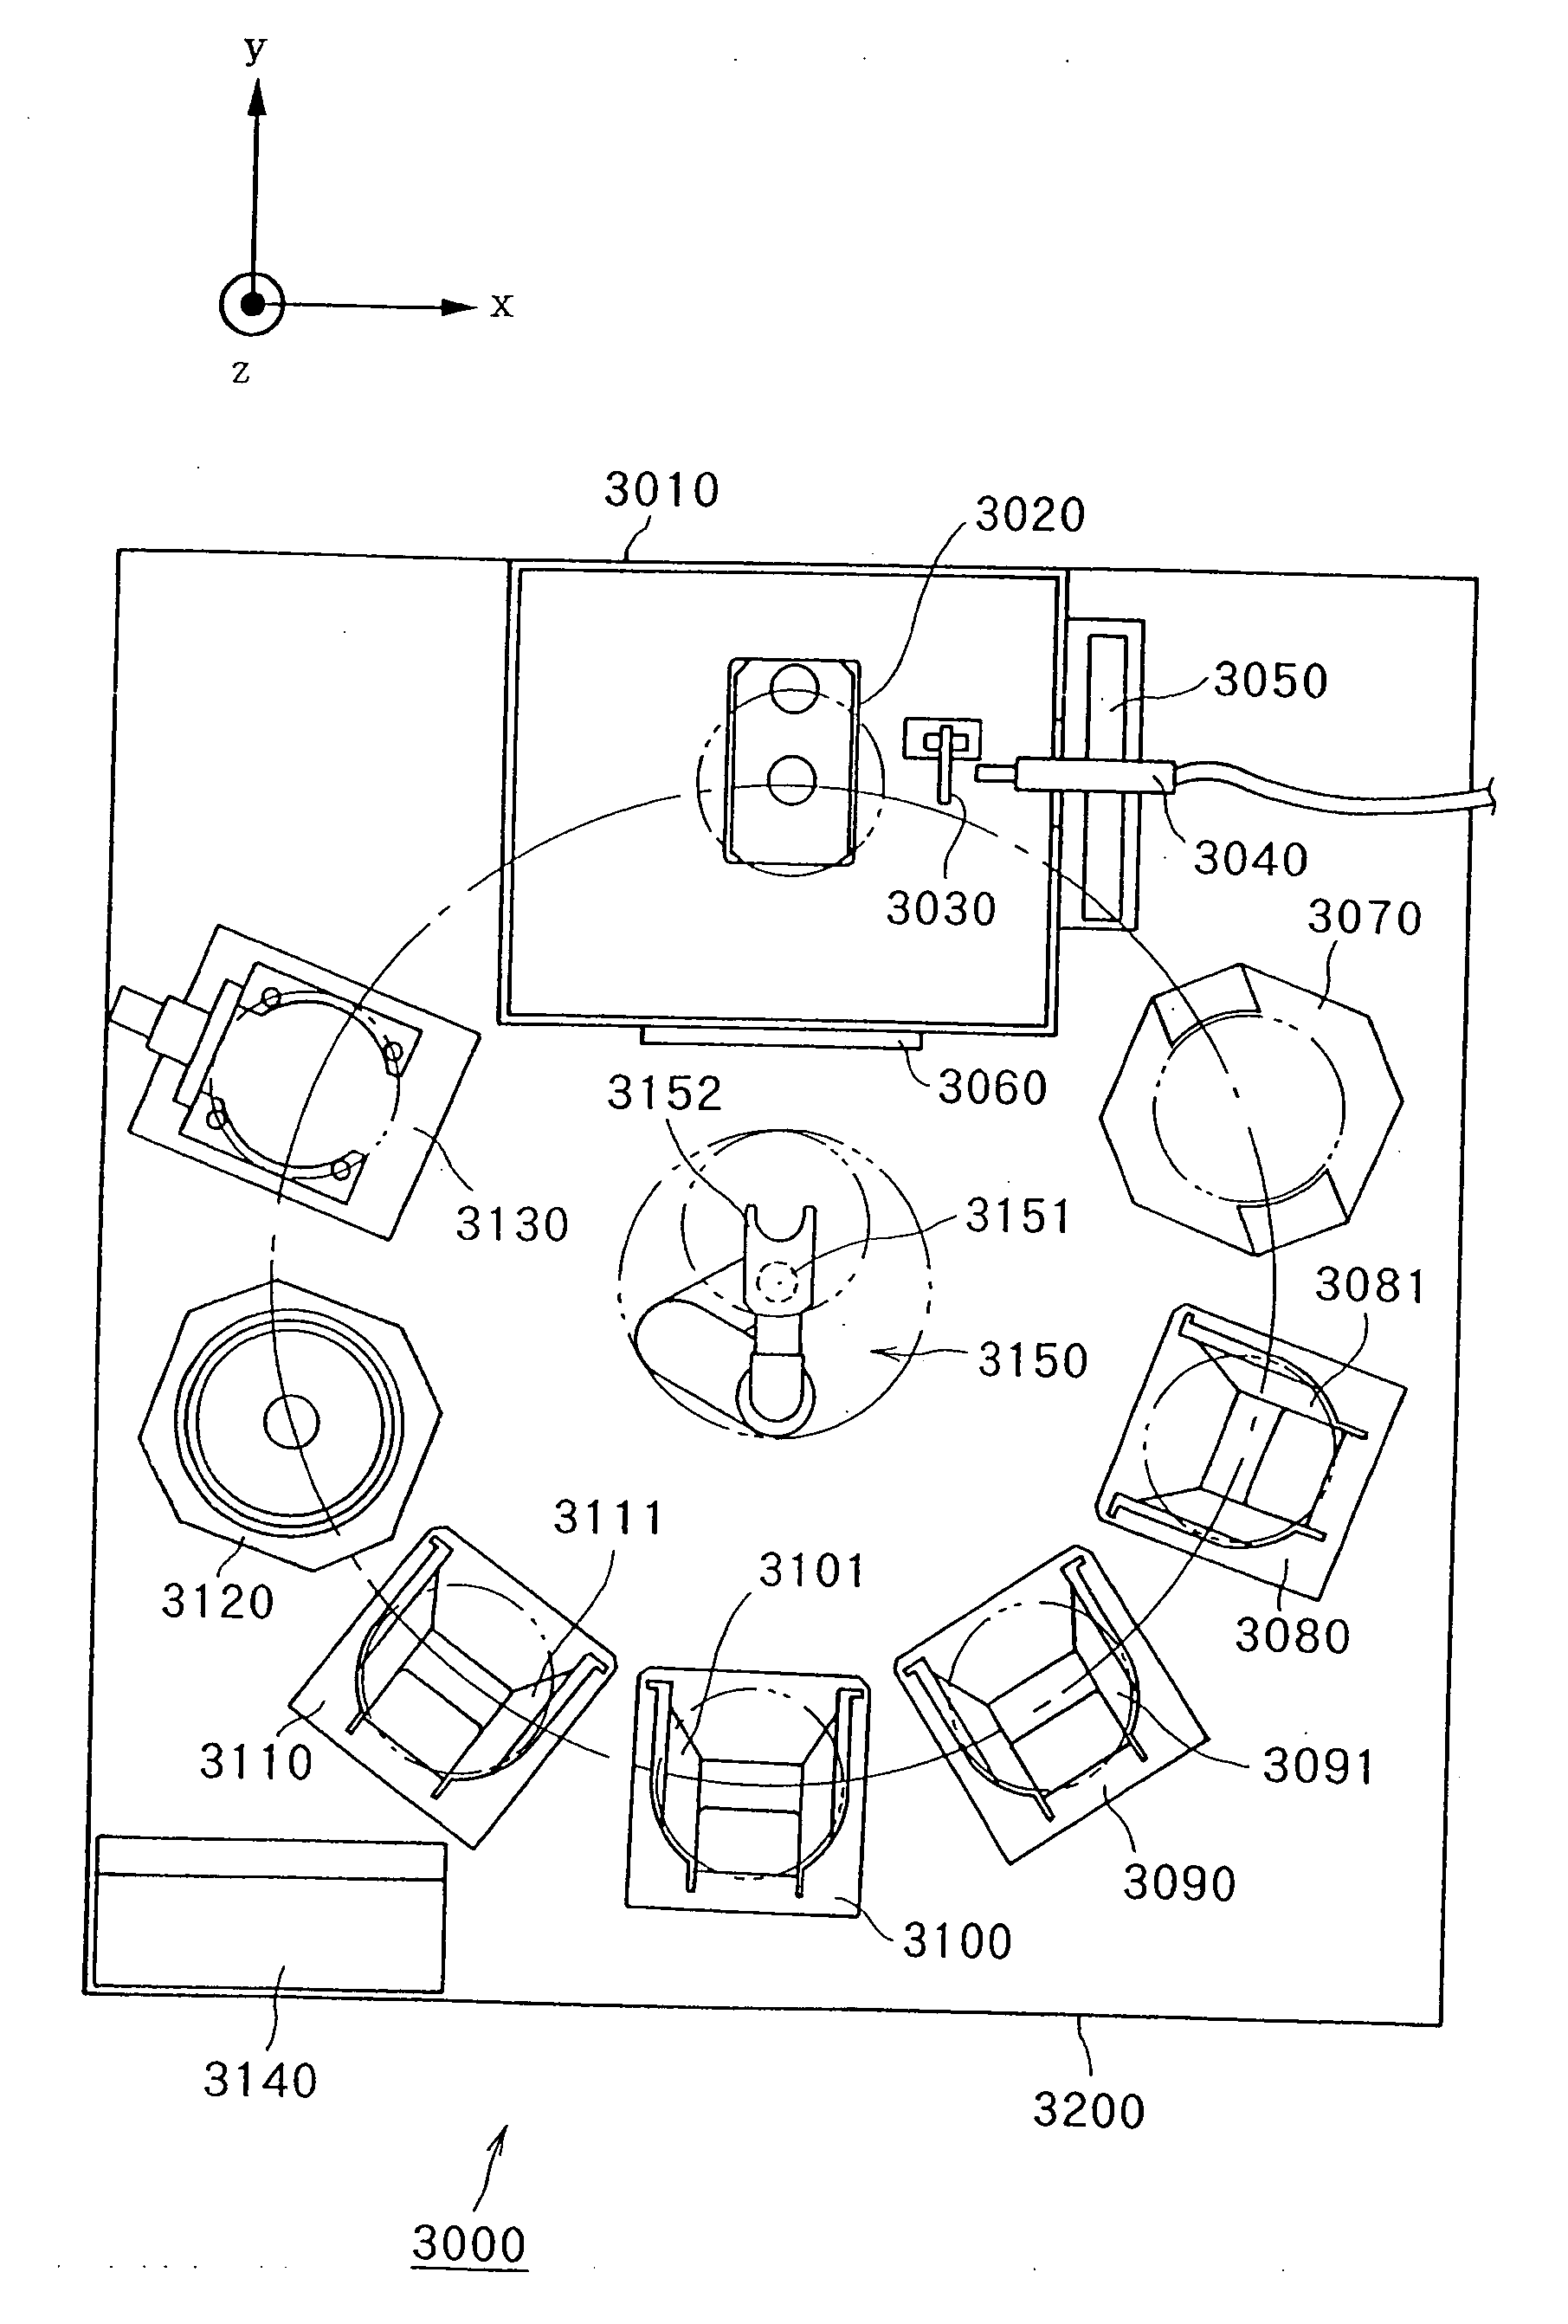 Sample processing system